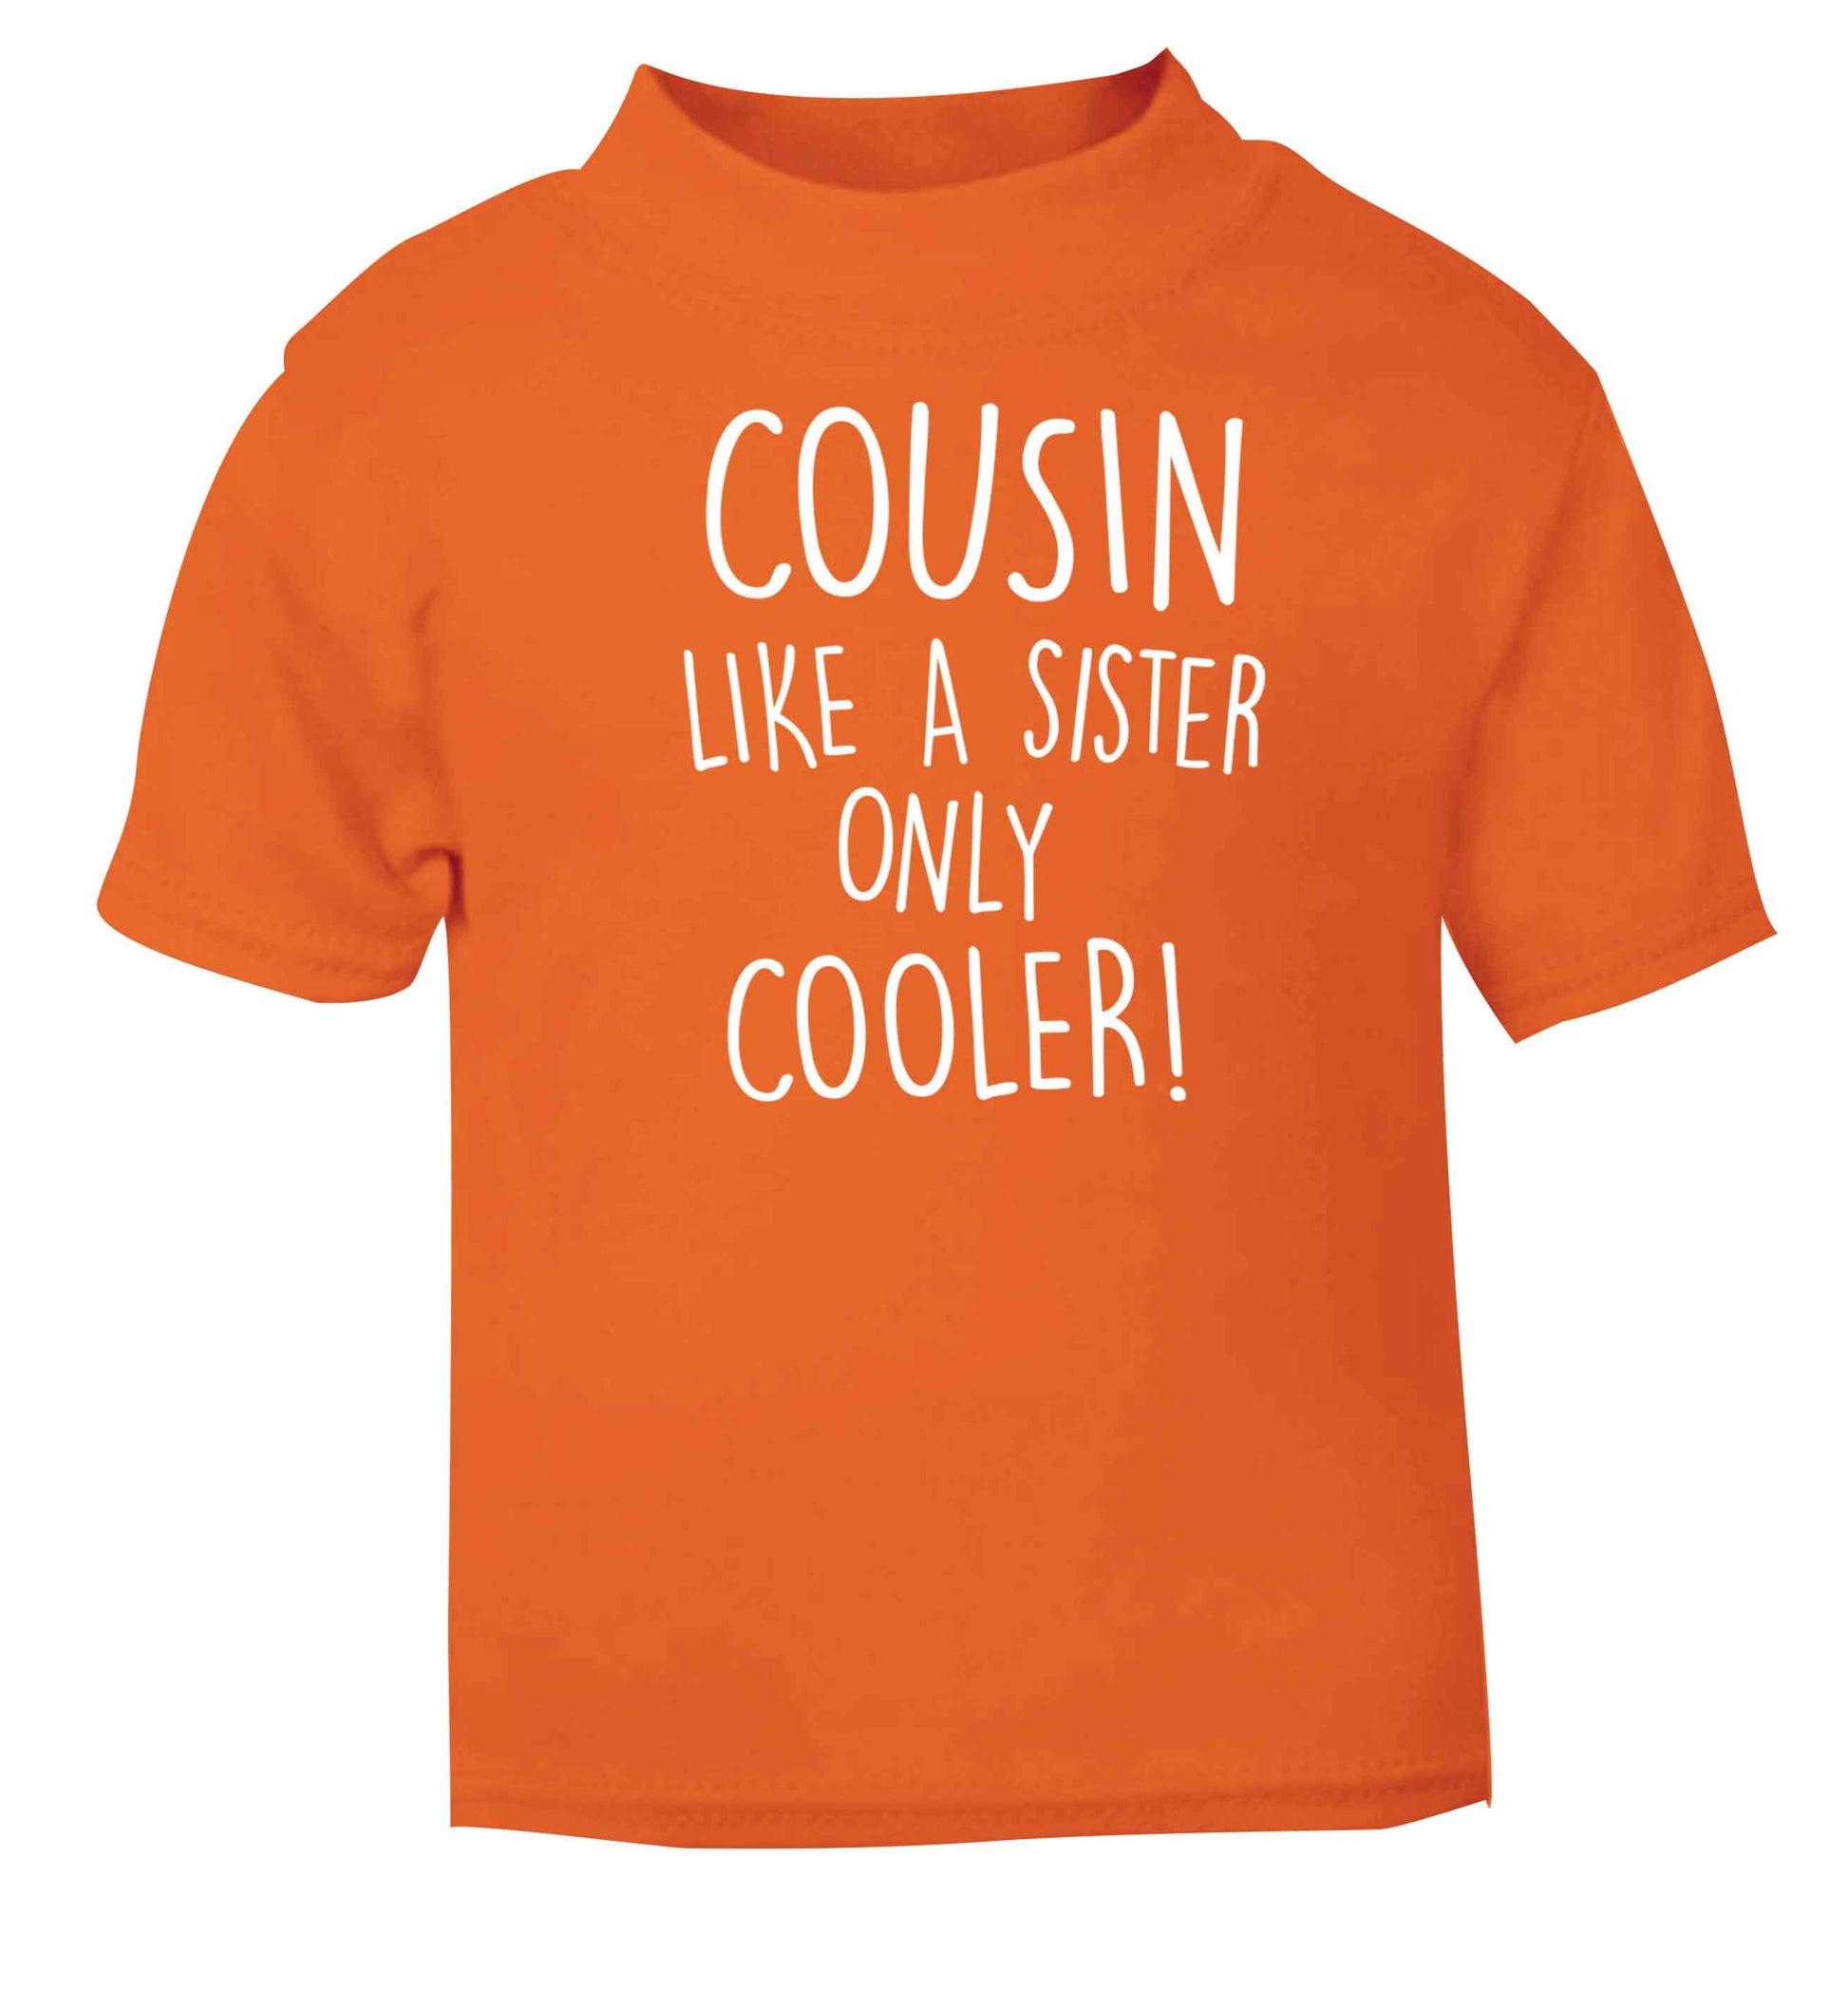 Cousin like a sister only cooler orange baby toddler Tshirt 2 Years